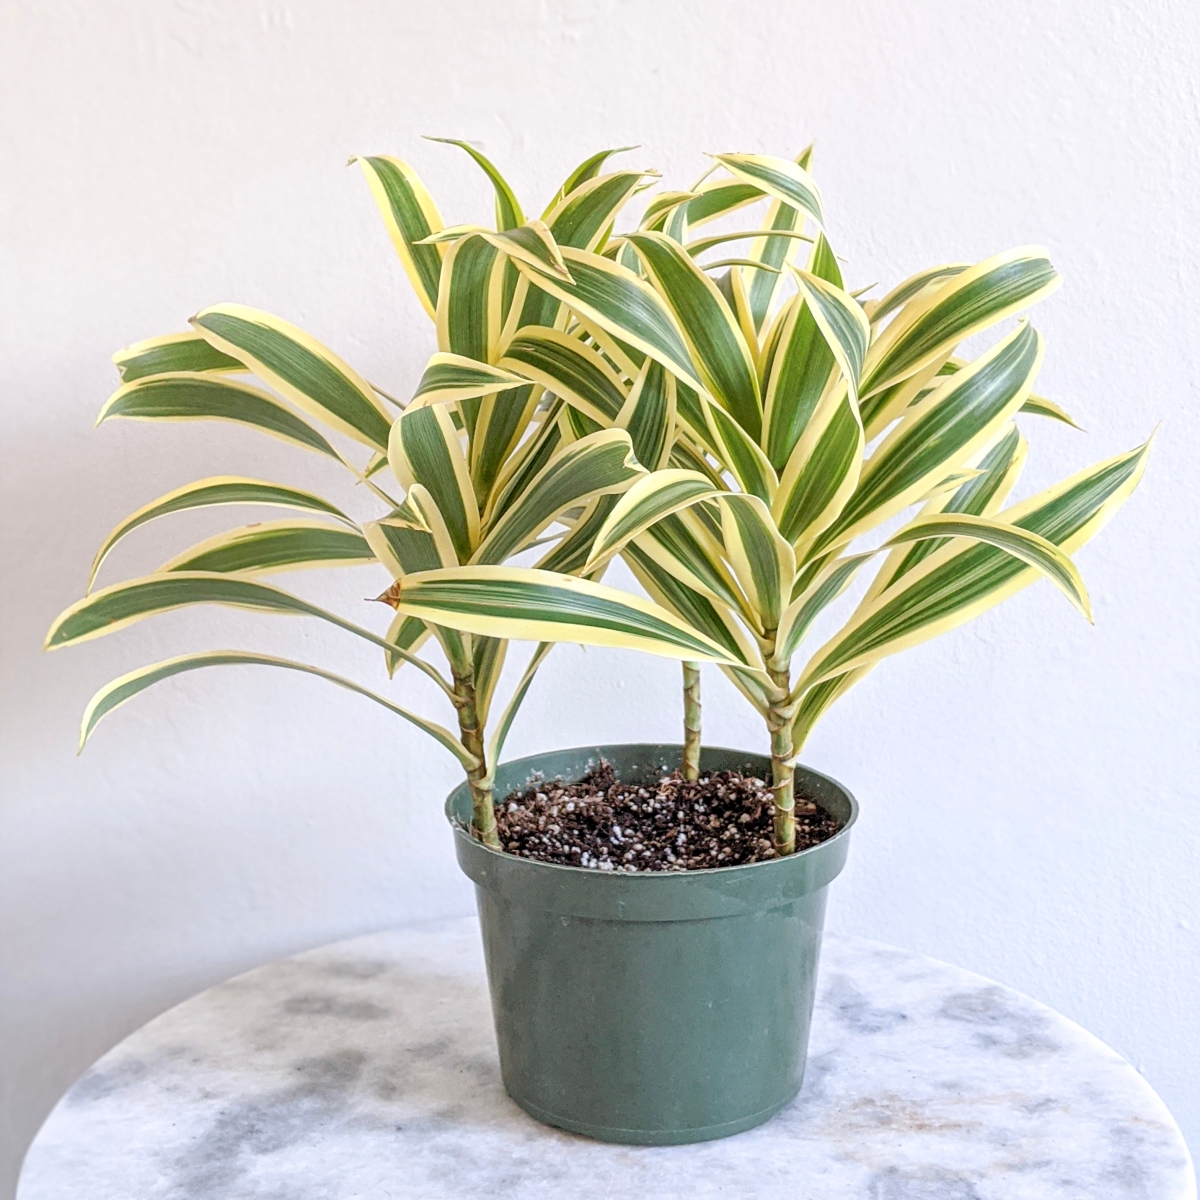 Dracaena plant with yellow striped leaves